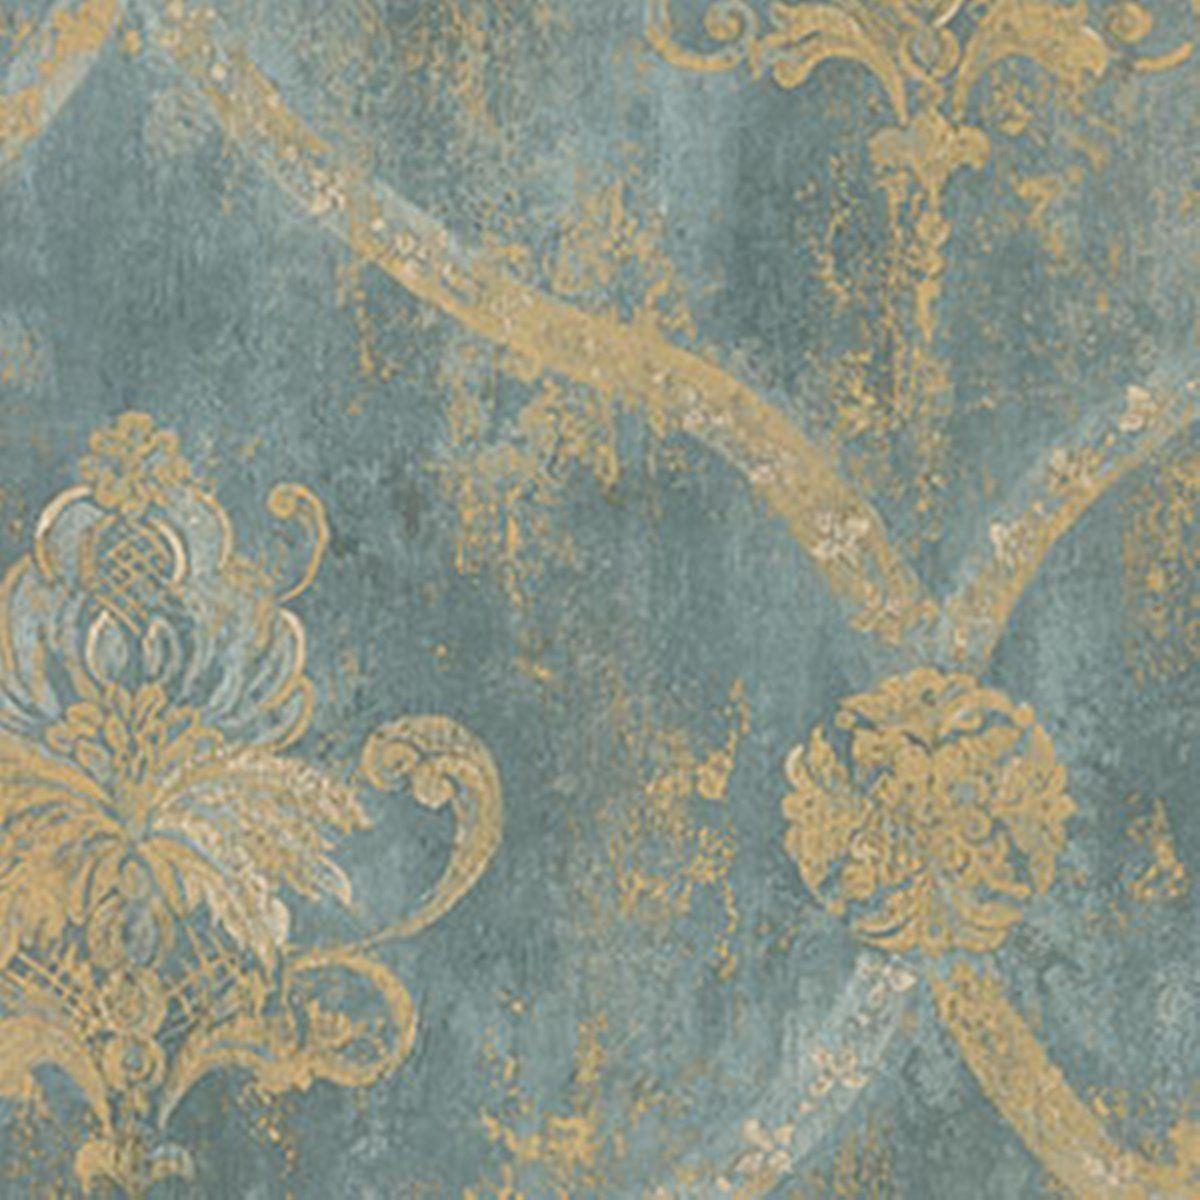 Wallpaper French Faux Aqua Blue Large Damask with Gold